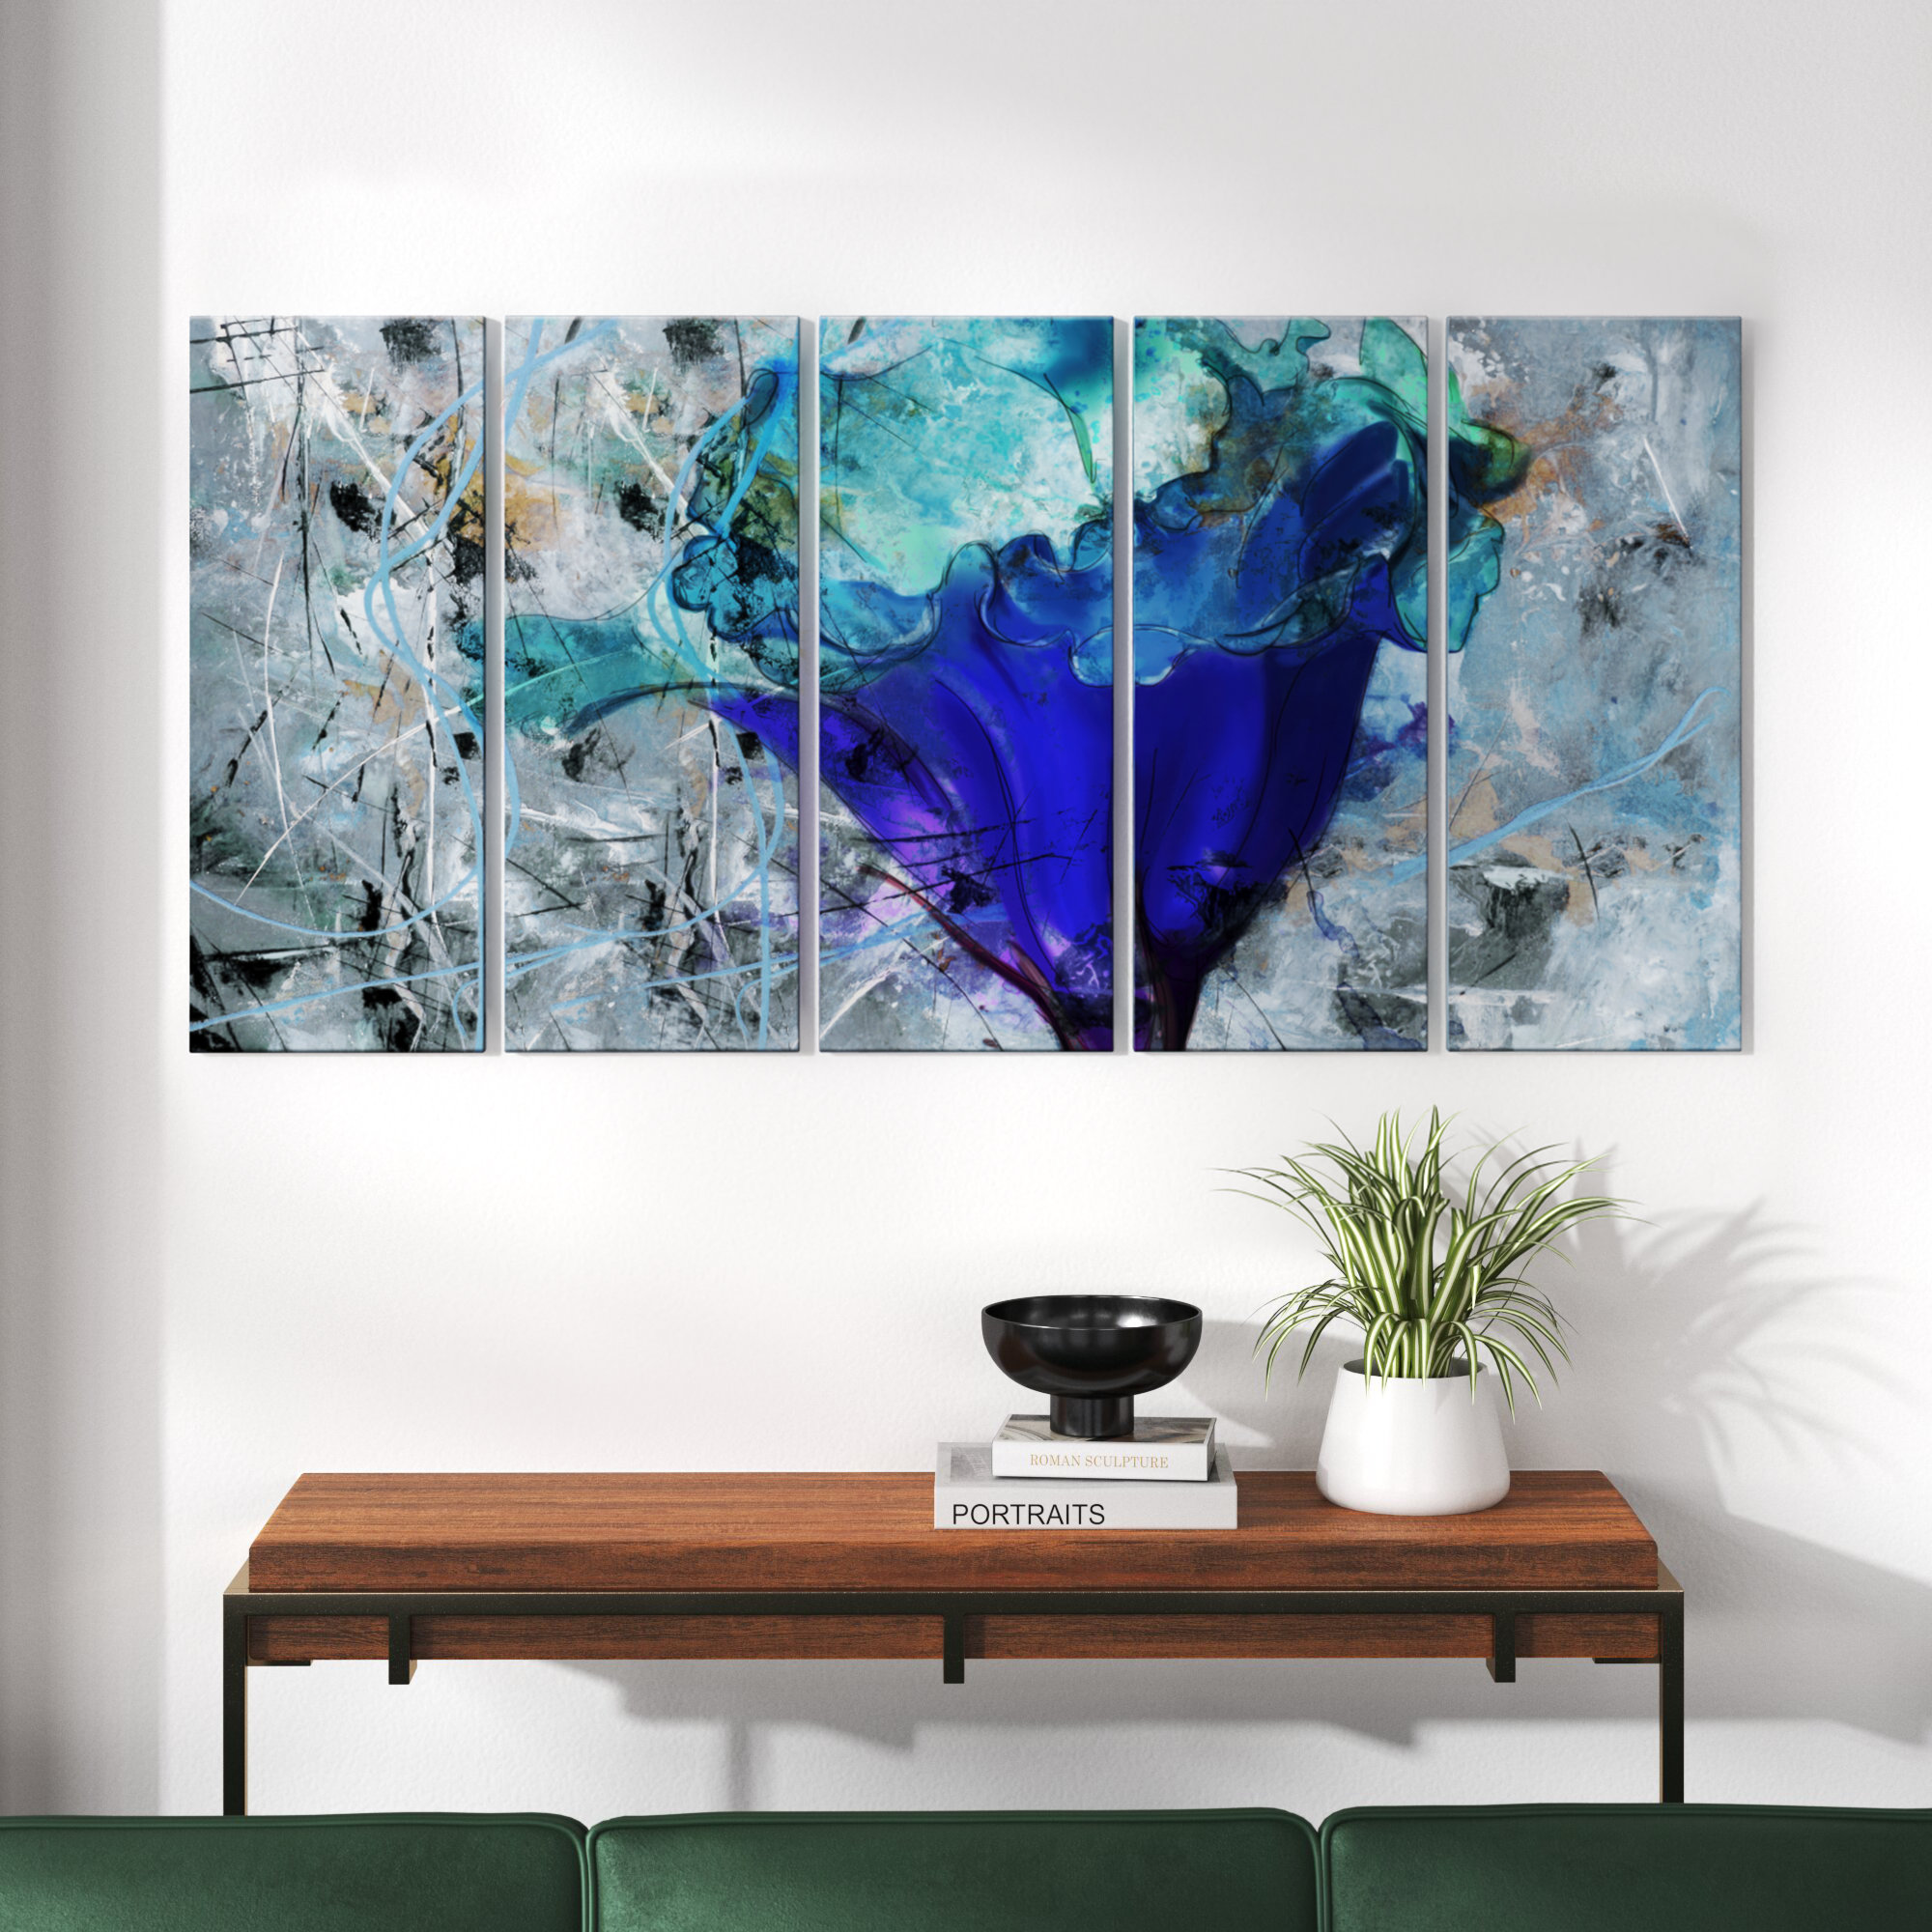 IDEA4WALL Fishing Rod Against the Water Surface - Wrapped Canvas Graphic Art  Print Multi-Piece Image & Reviews